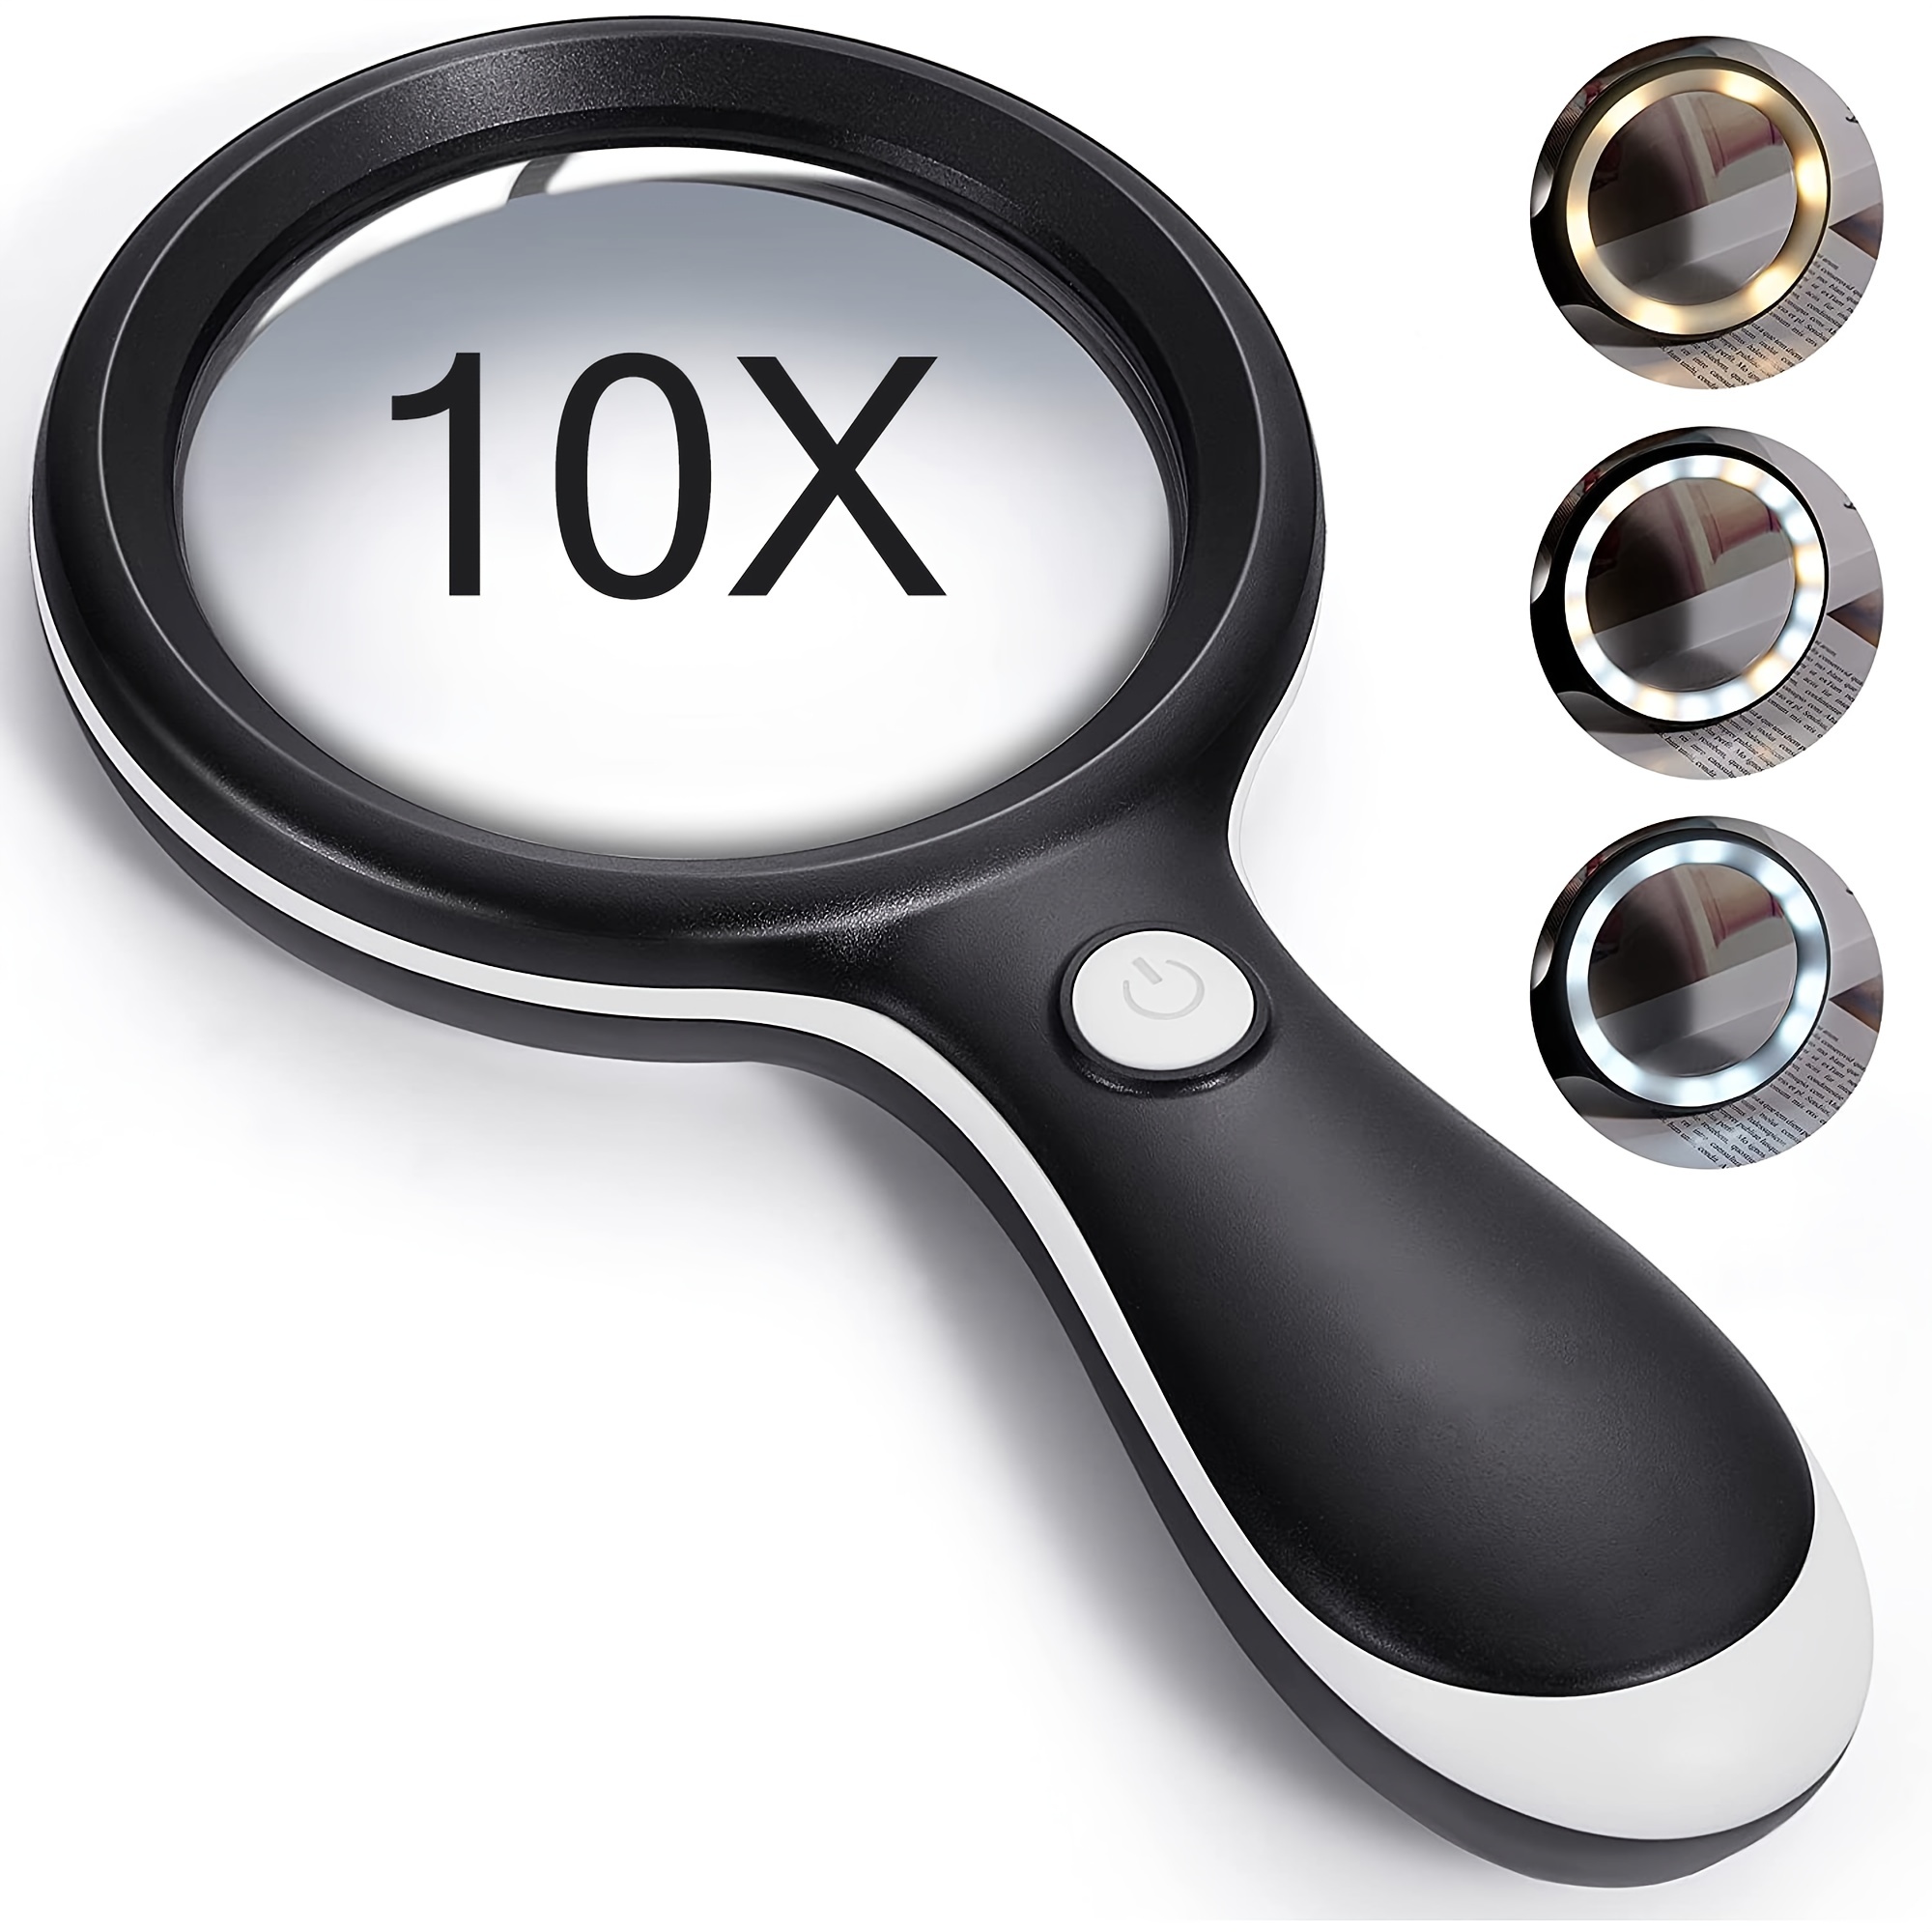 Extra Large LED Handheld Magnifying Glass with Light - 2X 4X 10X